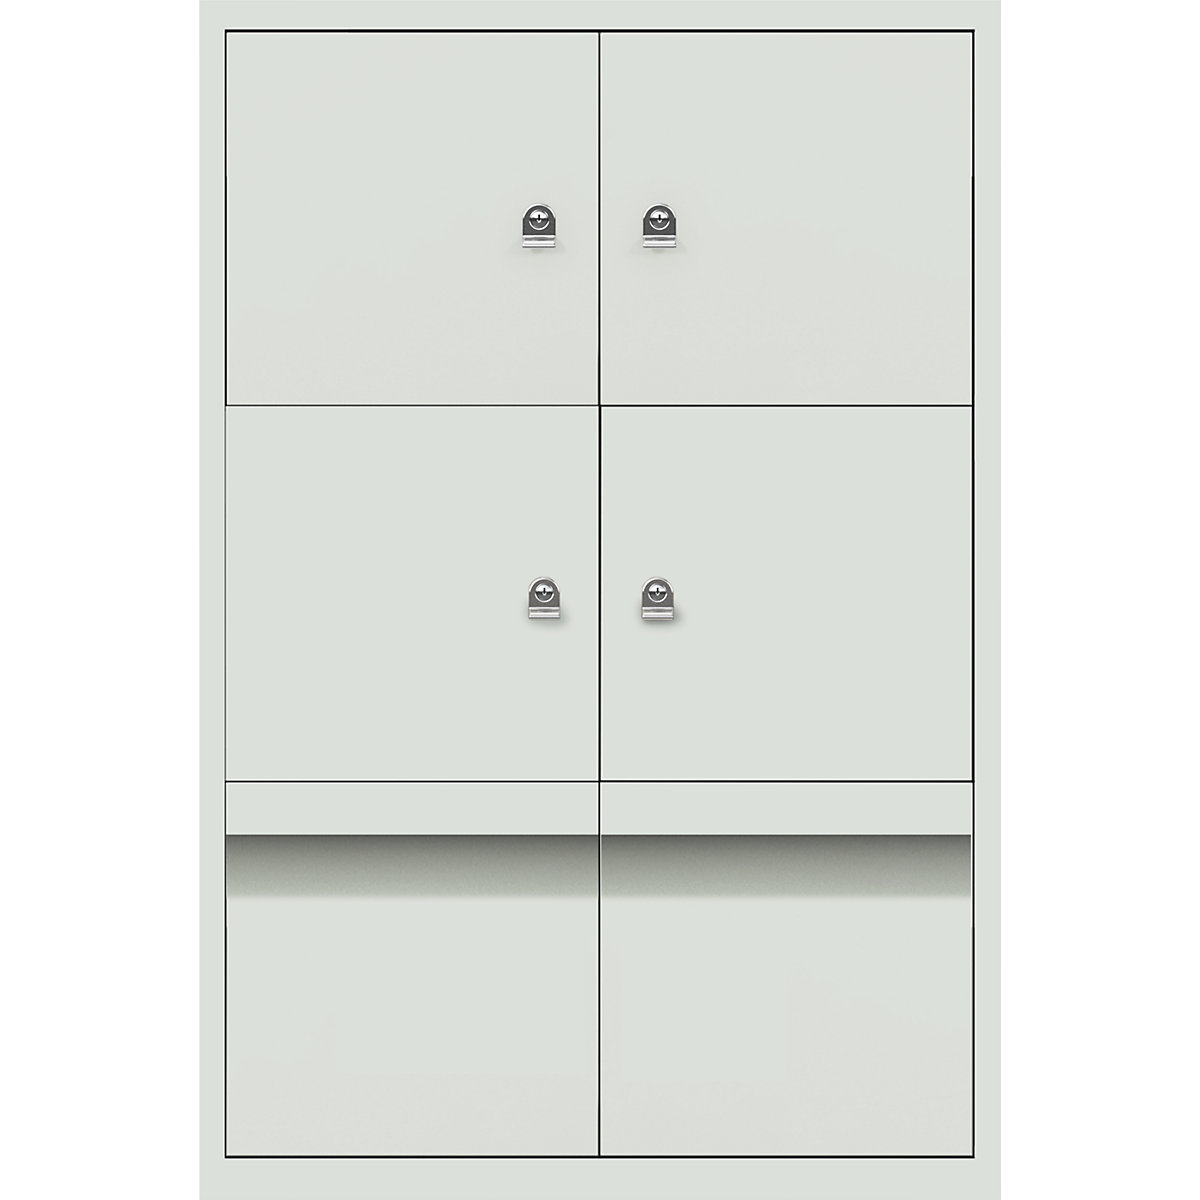 LateralFile™ lodge – BISLEY, with 4 lockable compartments and 2 drawers, height 375 mm each, portland-18